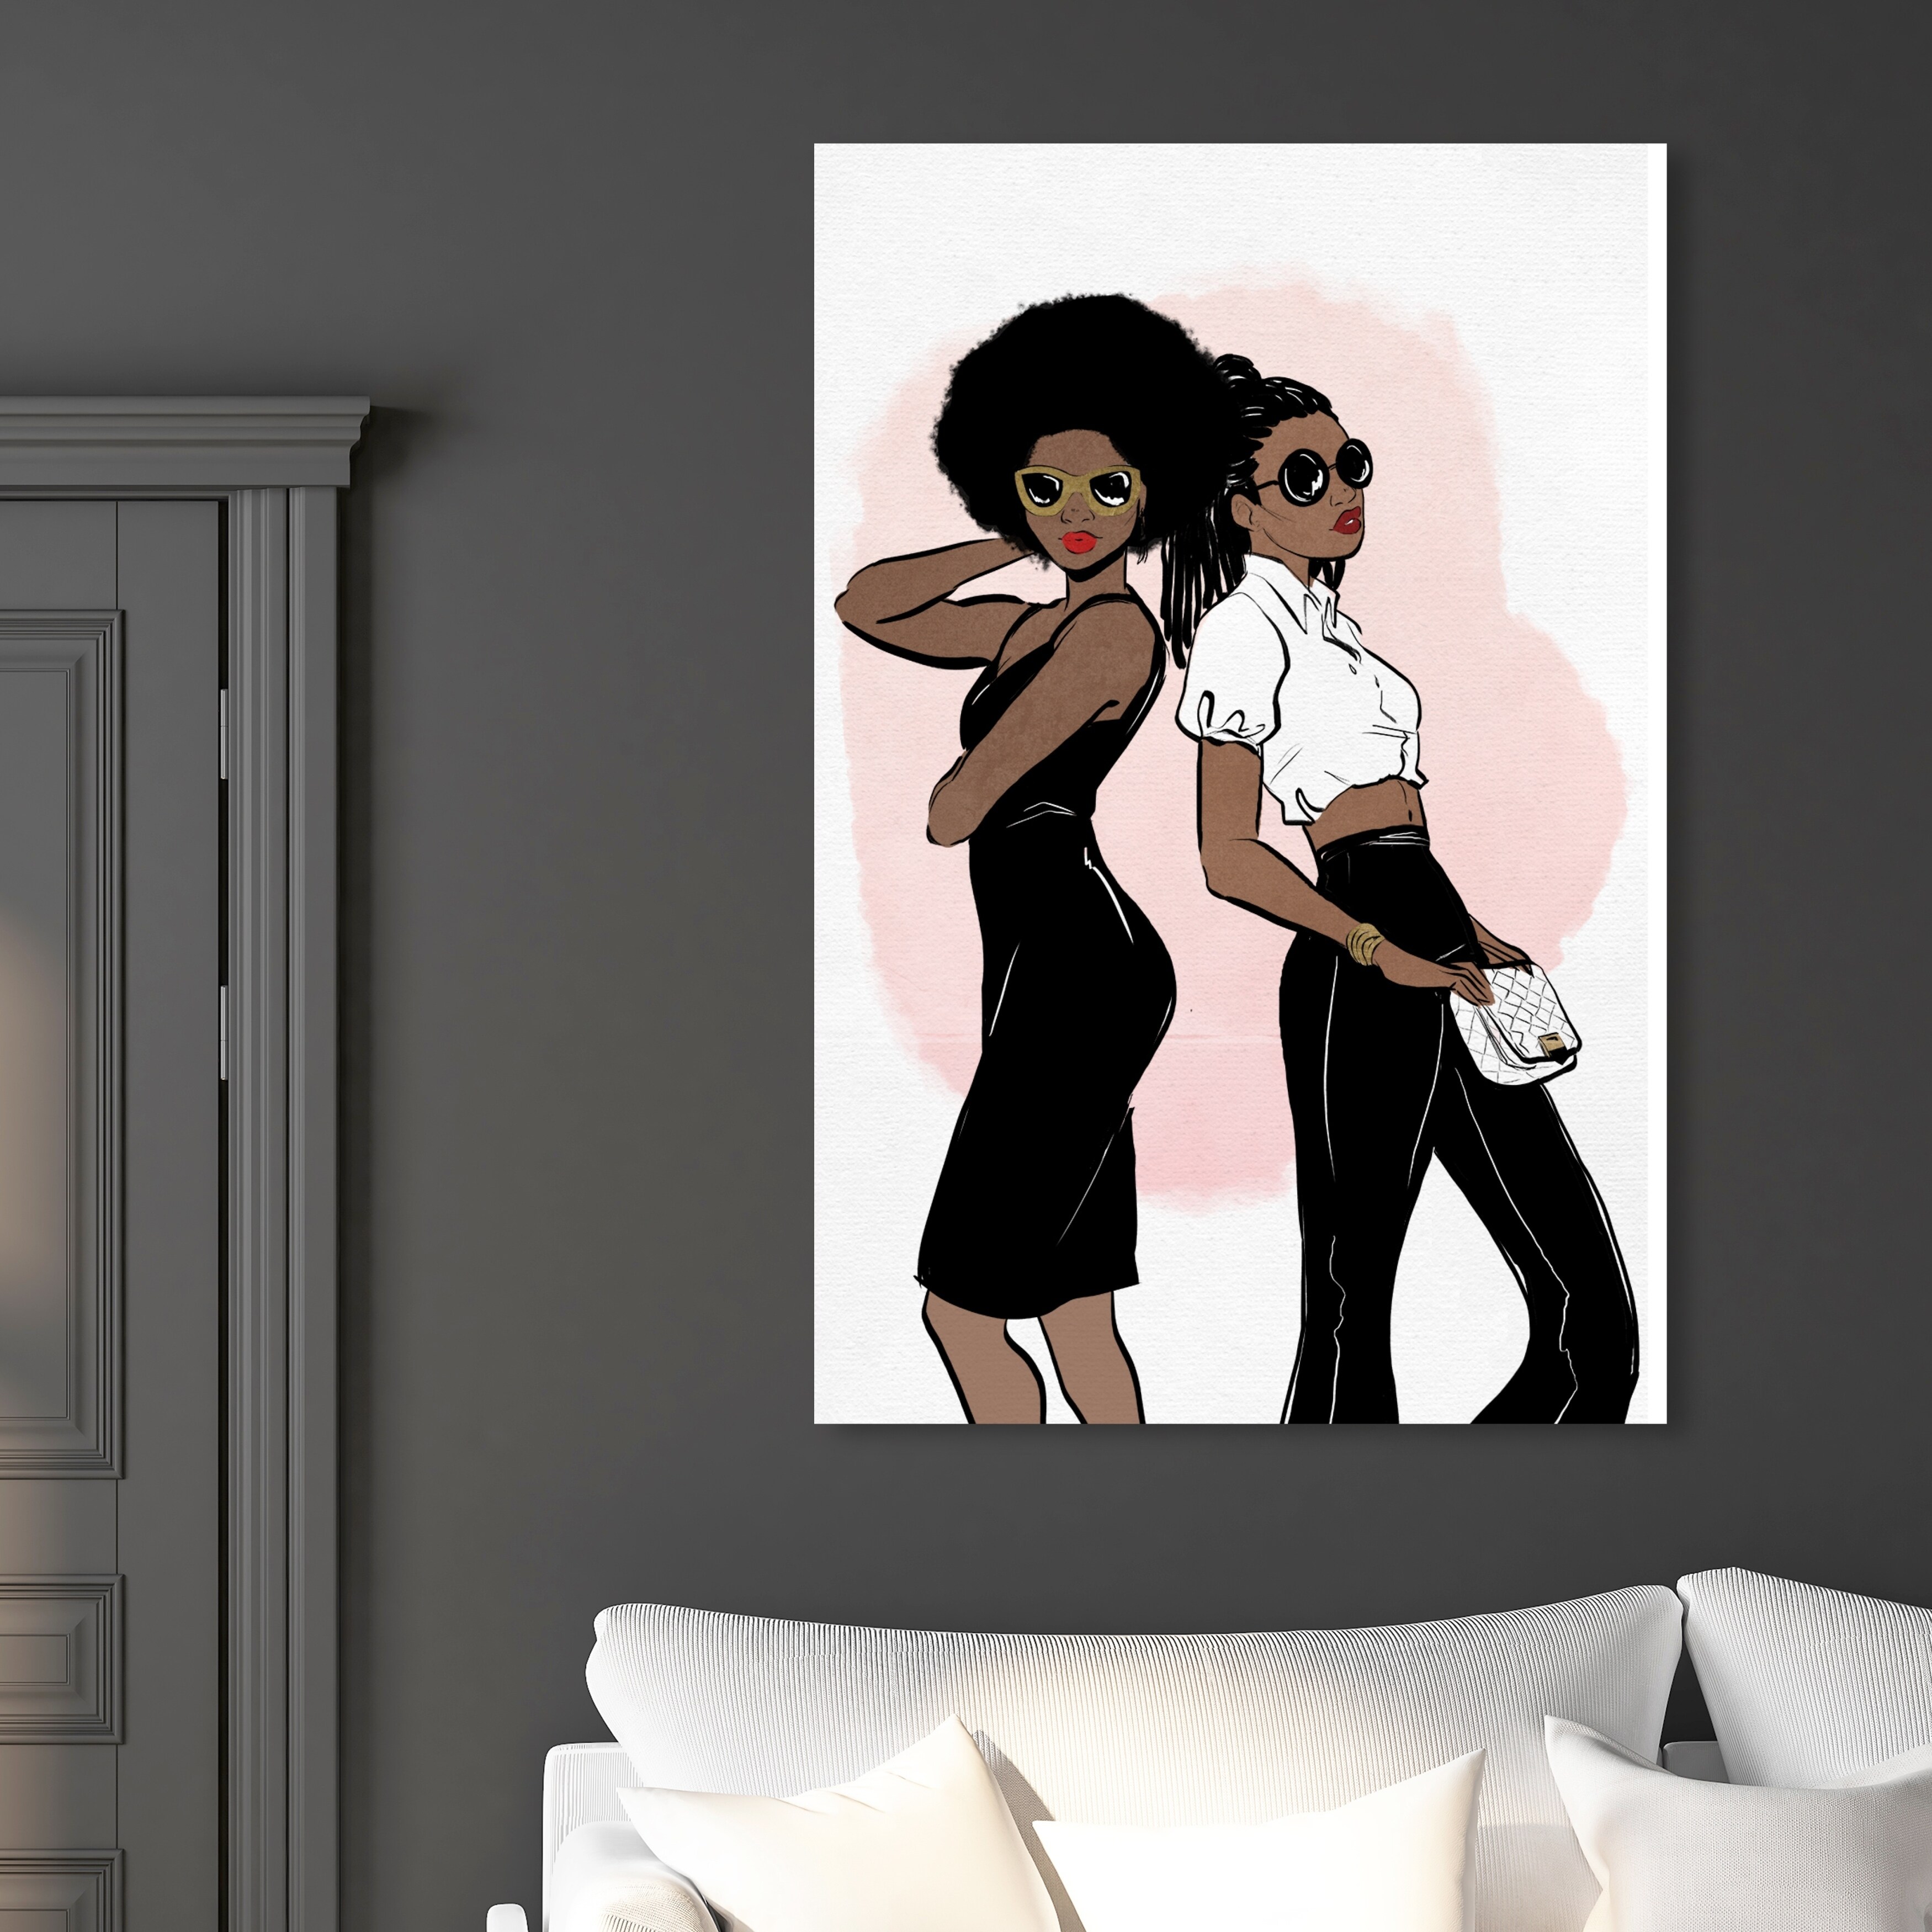 Oliver Gal 'Glamorous Best Friends' Fashion and Glam Wall Art